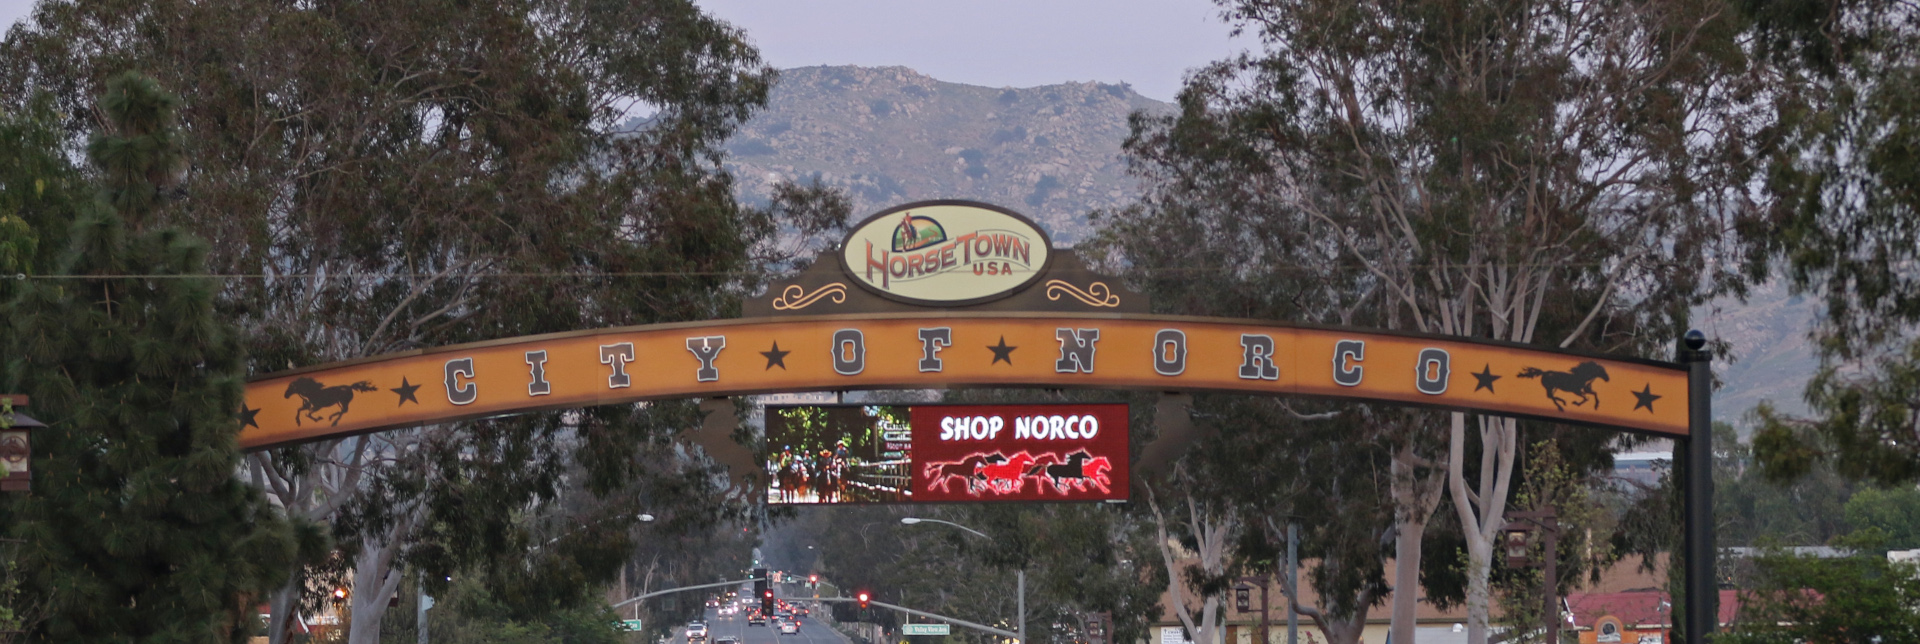 city of norco